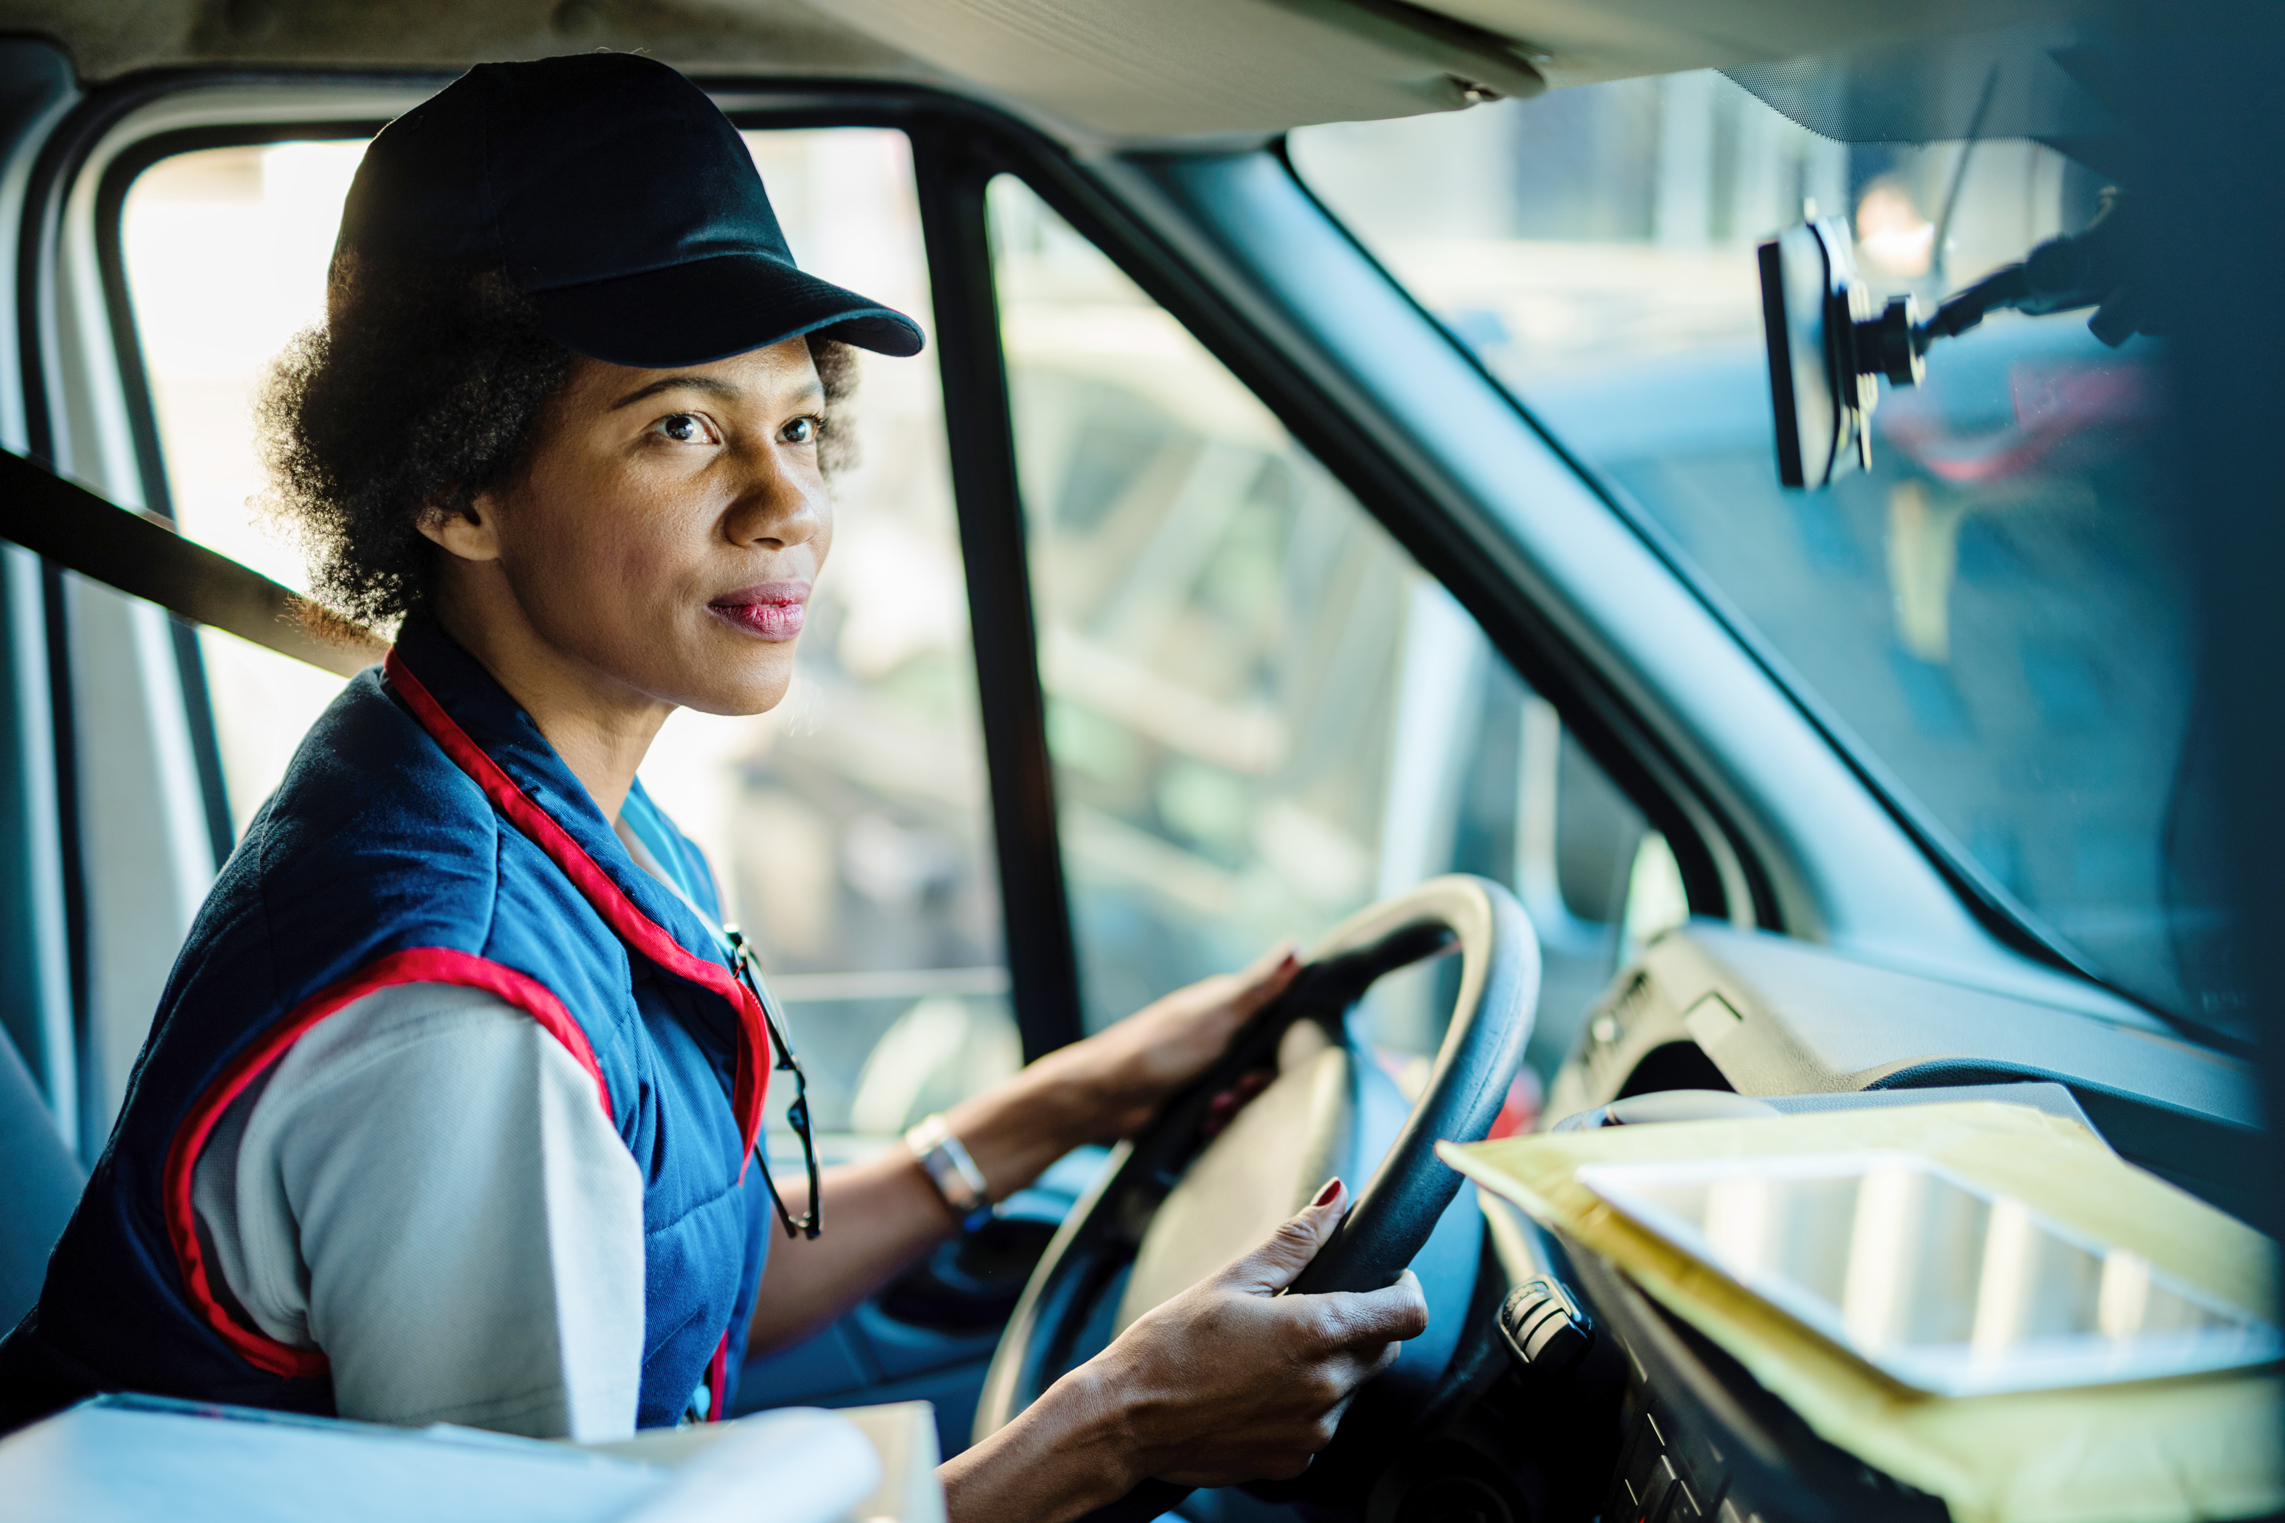 Best Paying Jobs In Transportation